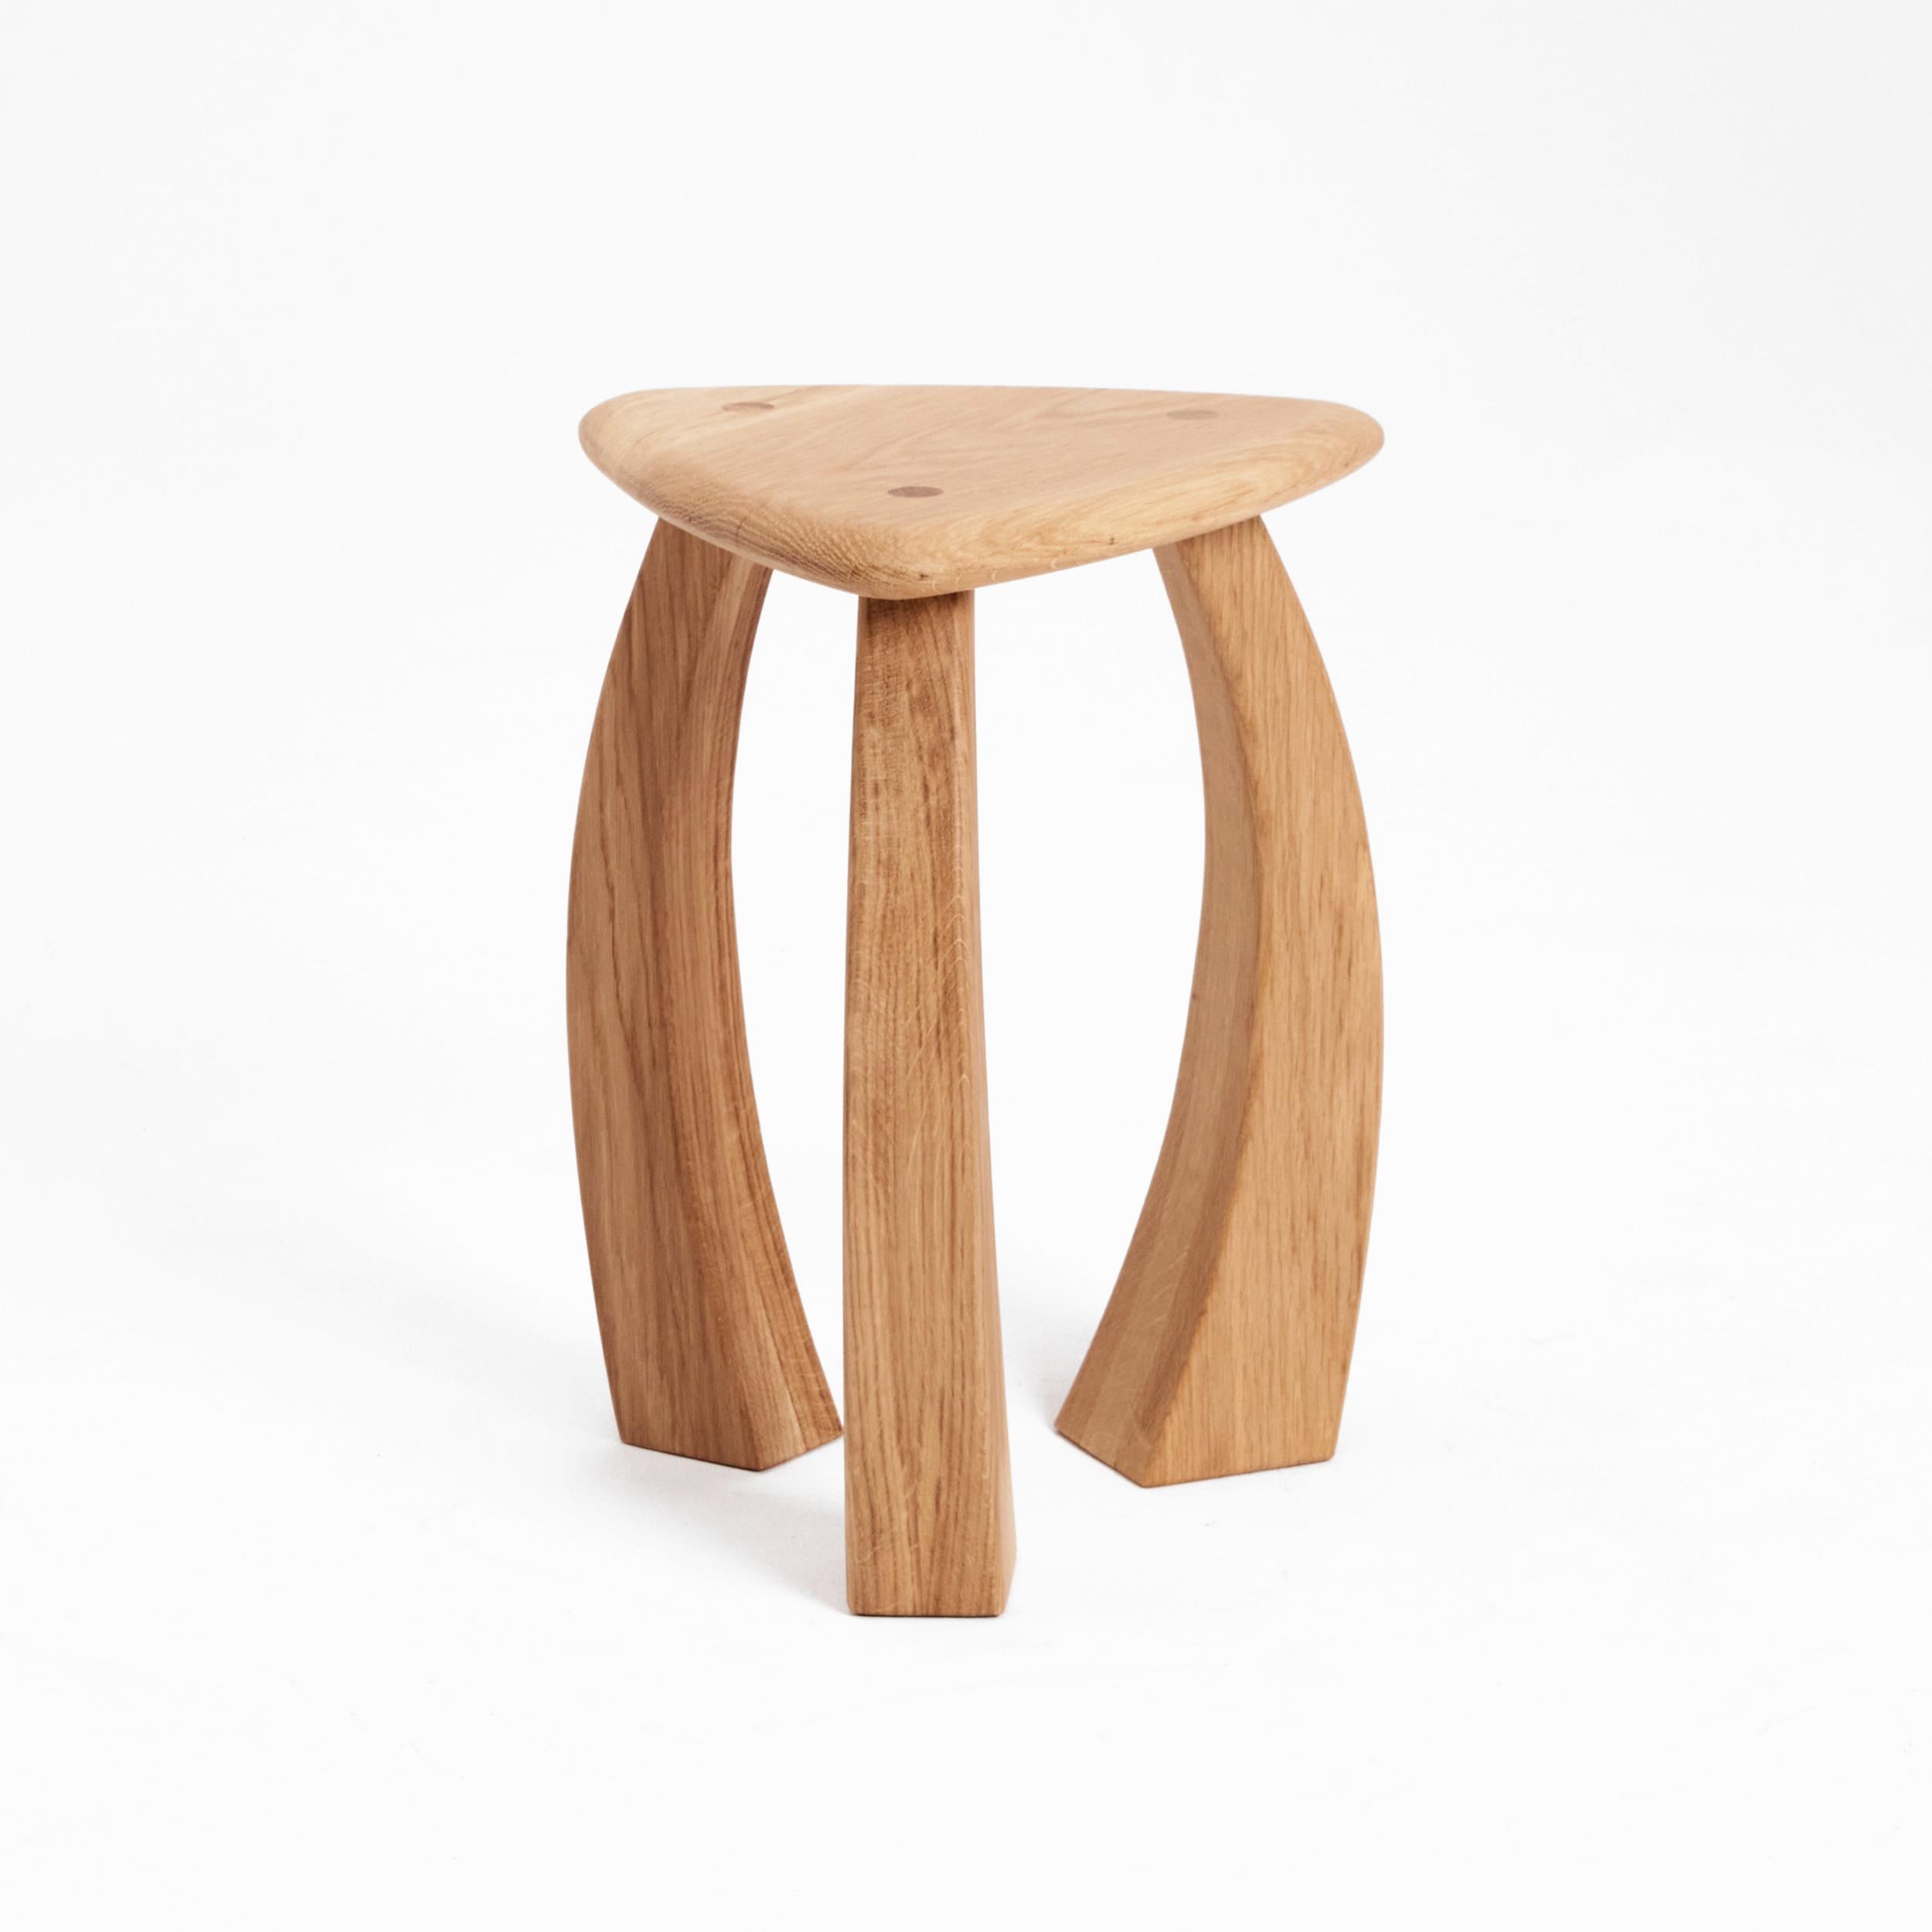 Arc de Stool 52 in Oak by Project 213A
Dimensions: D 39 x W 39 x H 52 cm
Materials: Oak wood. 

The taller version of the stool's legs curves inwards towards its triangular seat, fusing to showcase exquisite craftsmanship. The elegant complexion